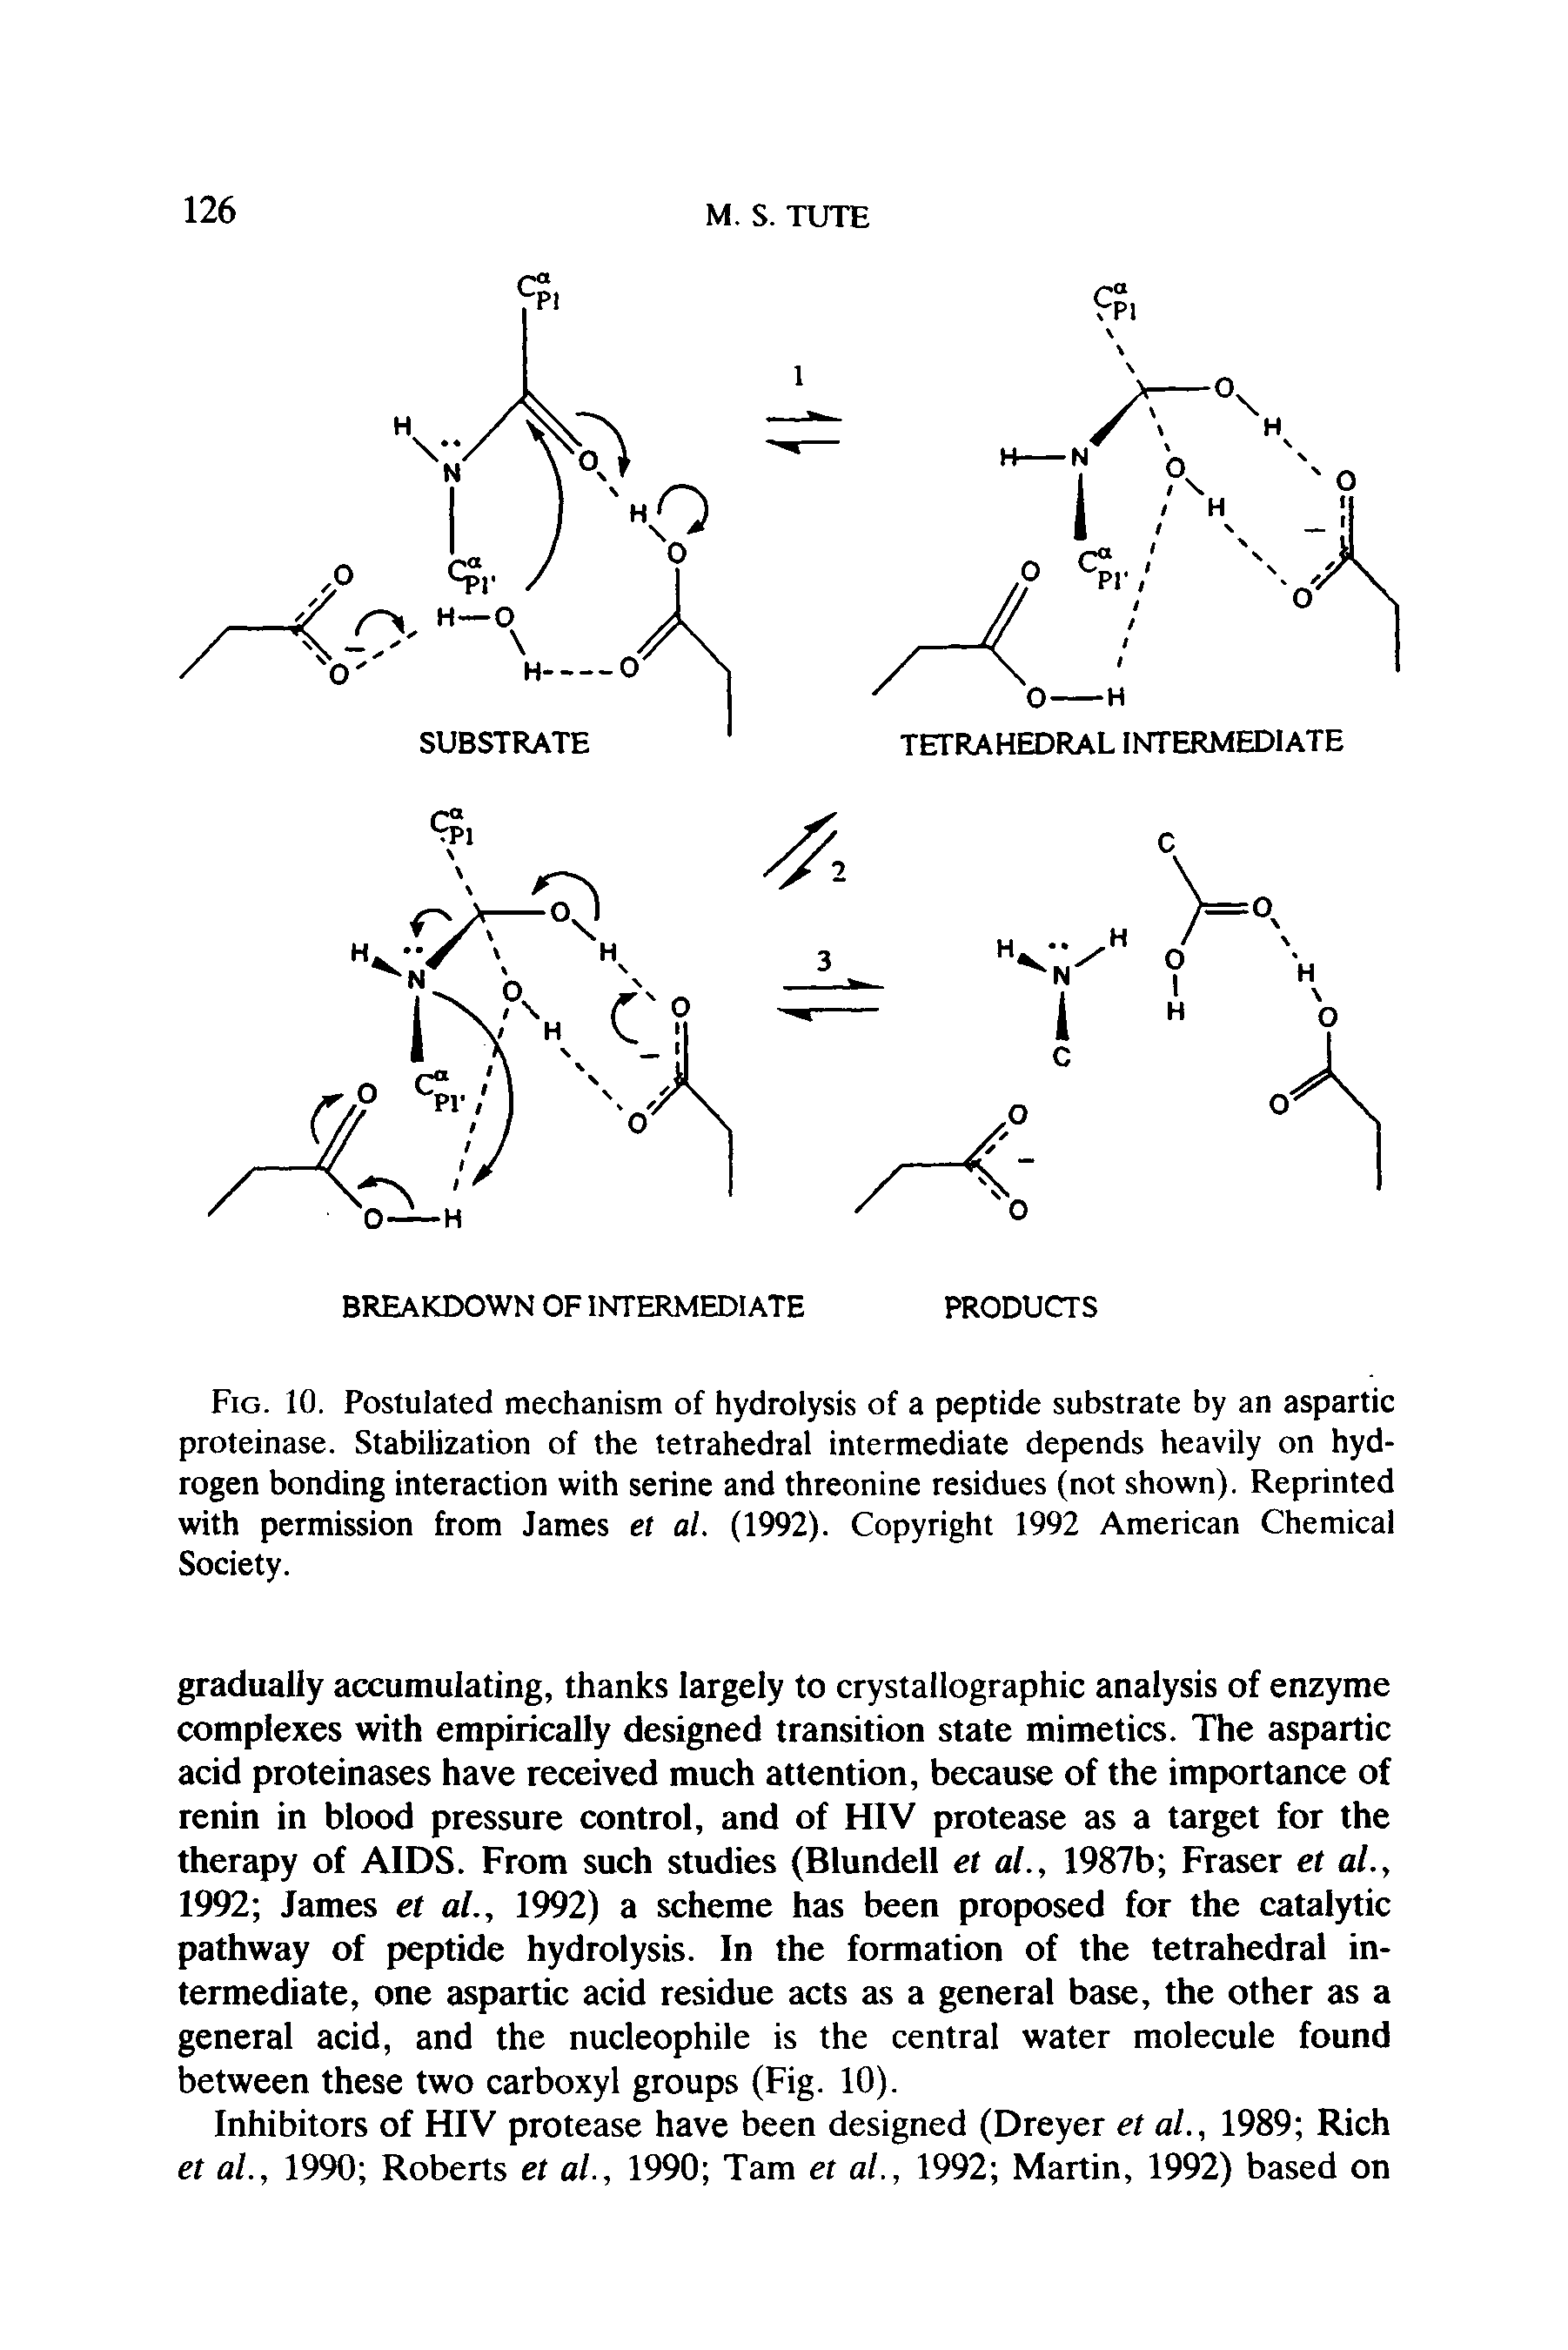 Fig. 10. Postulated mechanism of hydrolysis of a peptide substrate by an aspartic proteinase. Stabilization of the tetrahedral intermediate depends heavily on hydrogen bonding interaction with serine and threonine residues (not shown). Reprinted with permission from James et al. (1992). Copyright 1992 American Chemical Society.